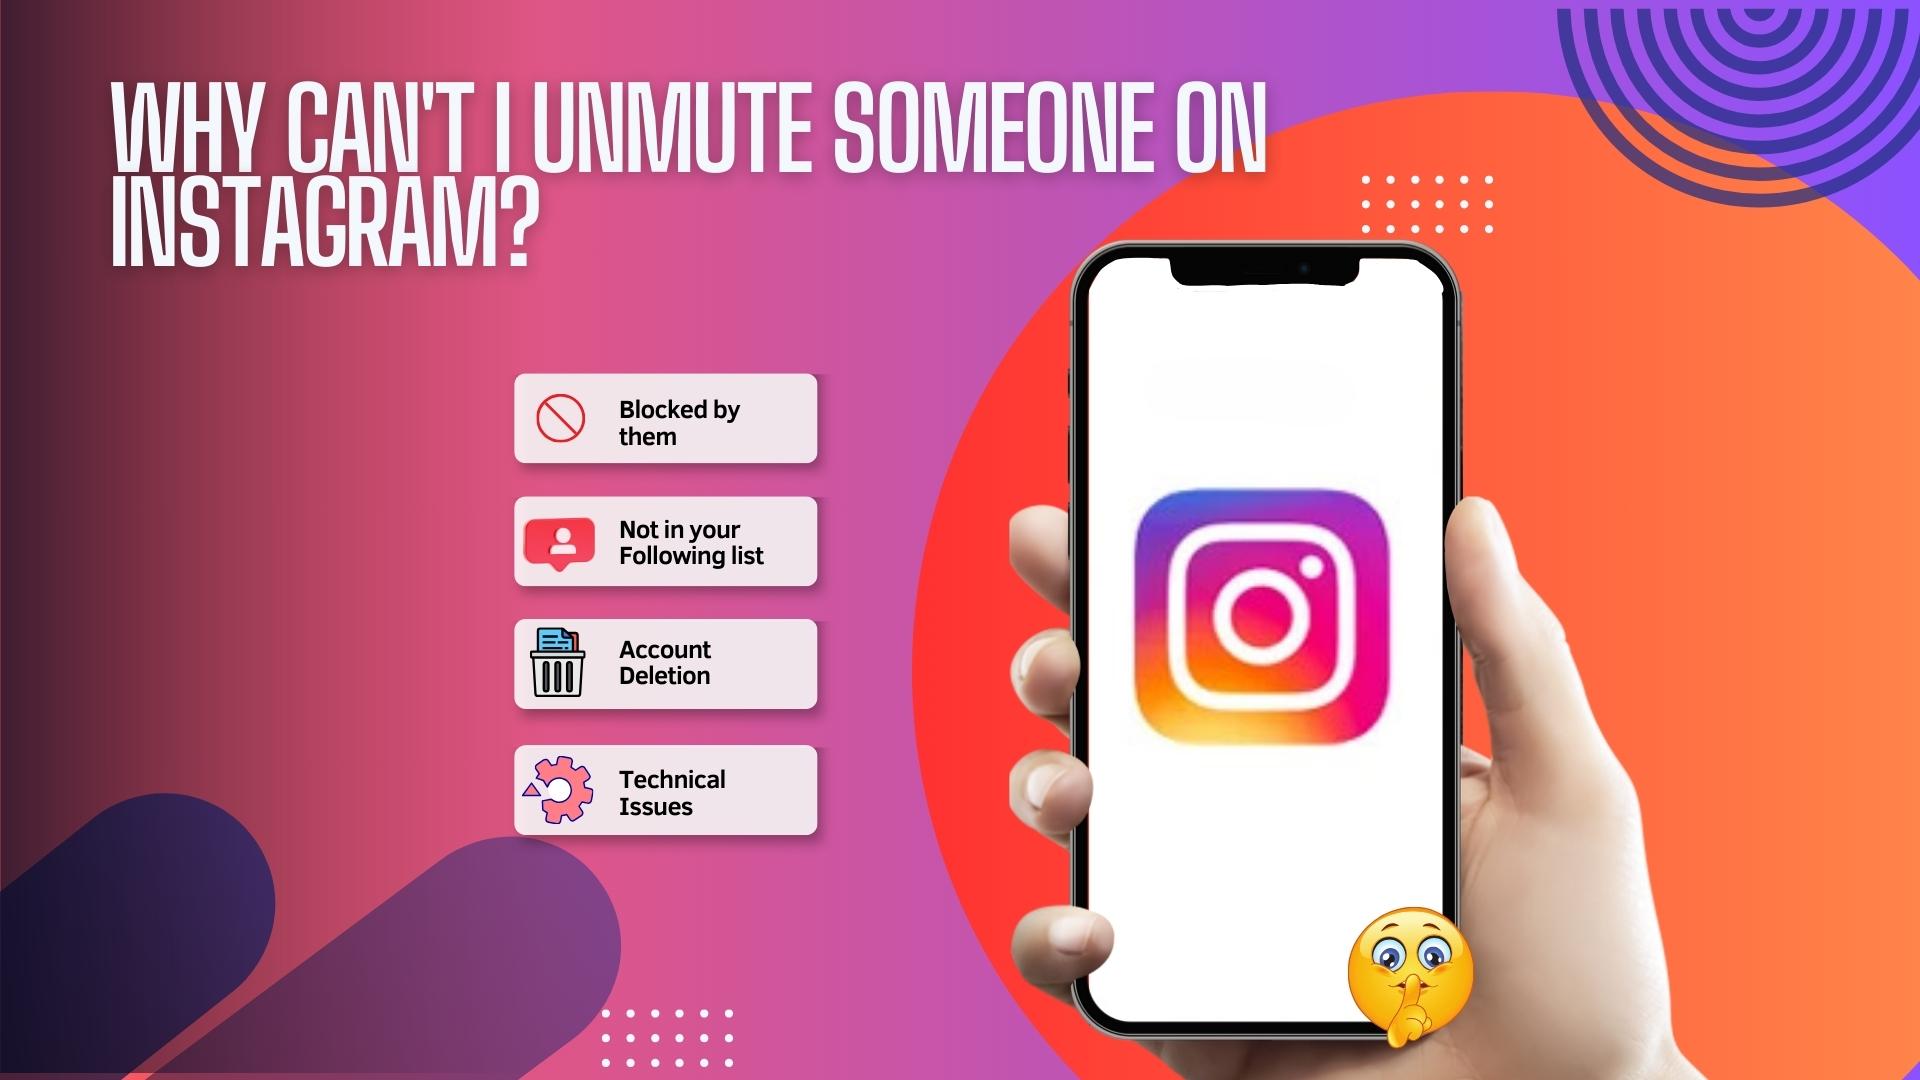 Why can't I unmute someone on Instagram?